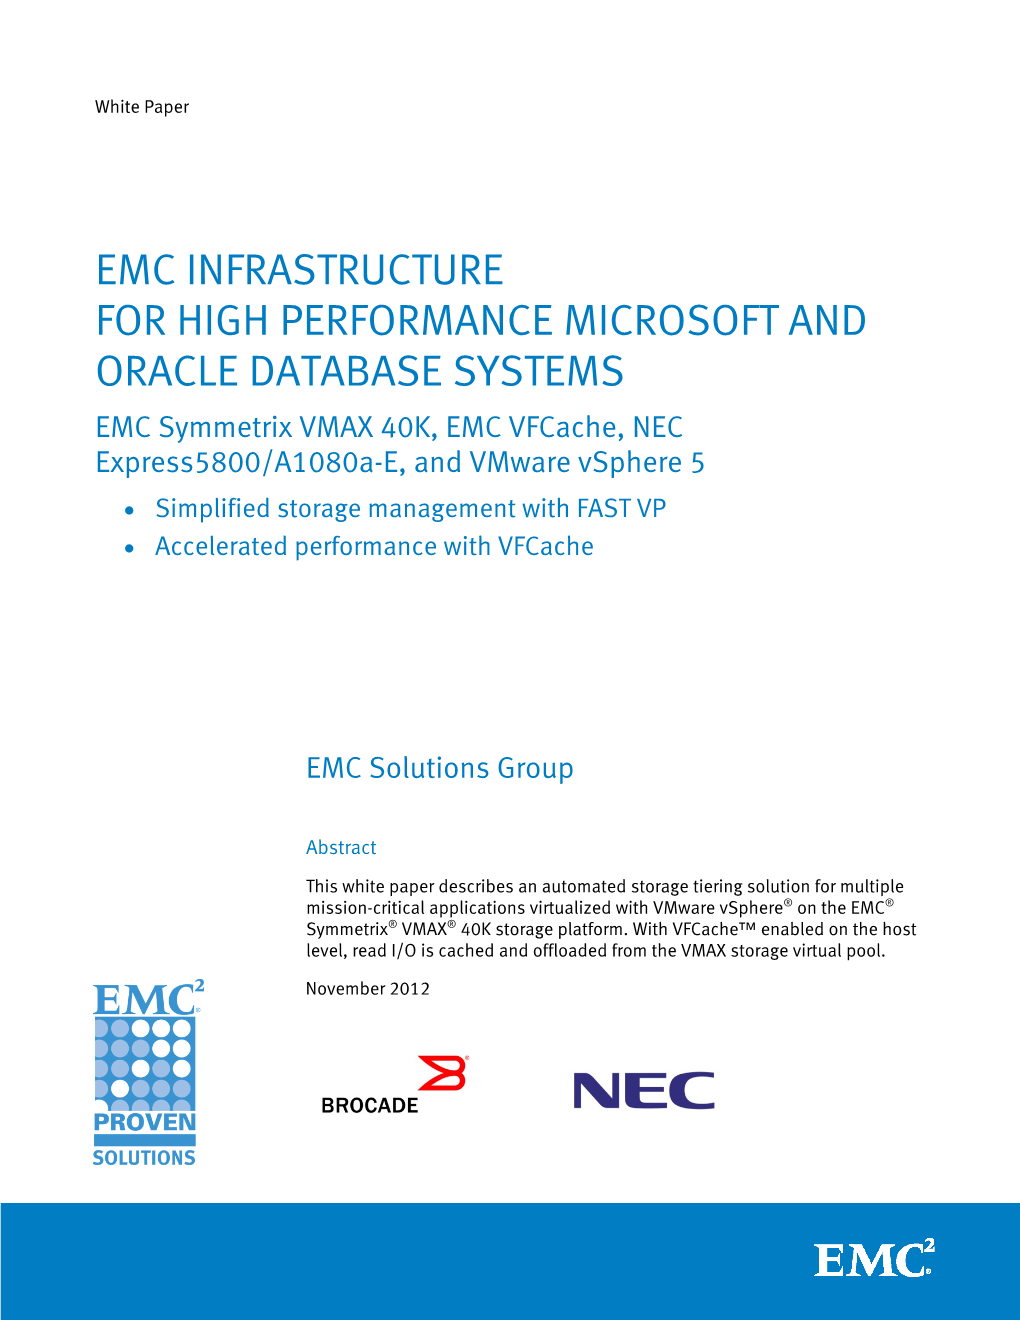 EMC INFRASTRUCTURE for HIGH PERFORMANCE MICROSOFT and ORACLE DATABASE SYSTEMS EMC Symmetrix VMAX 40K, EMC Vfcache, NEC Express5800/A1080a-E, and Vmware Vsphere 5